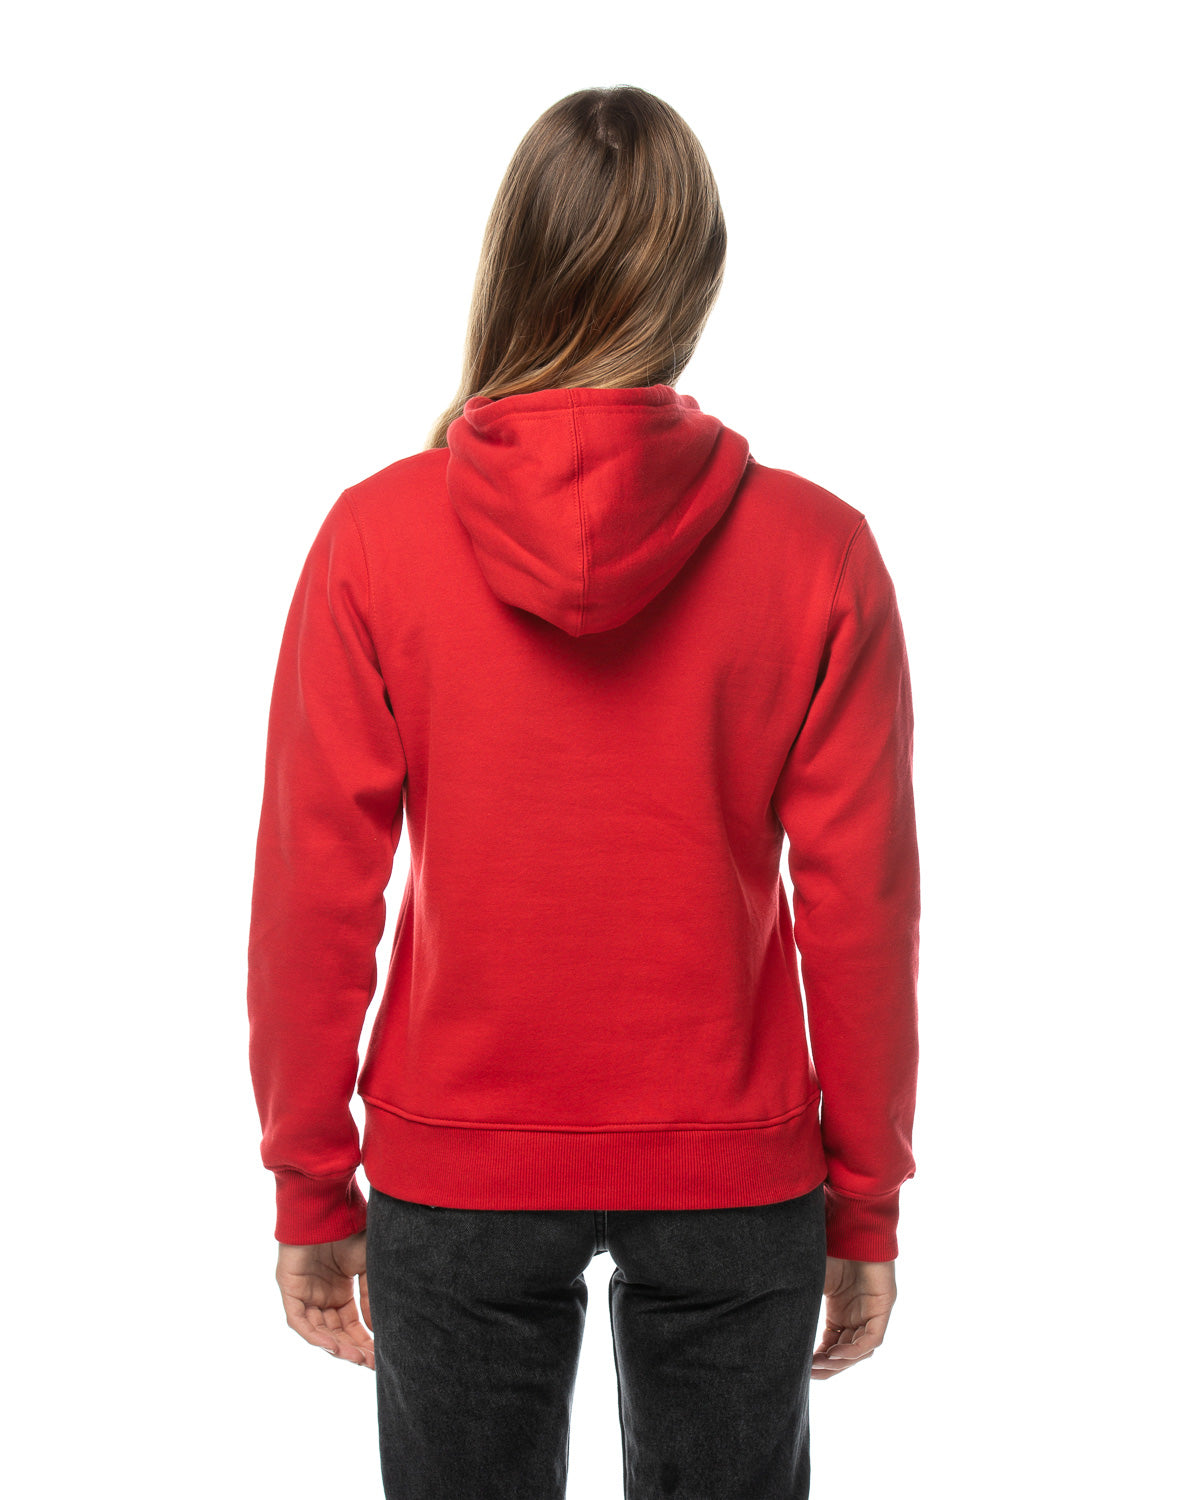 Griffith hoodie red unisex